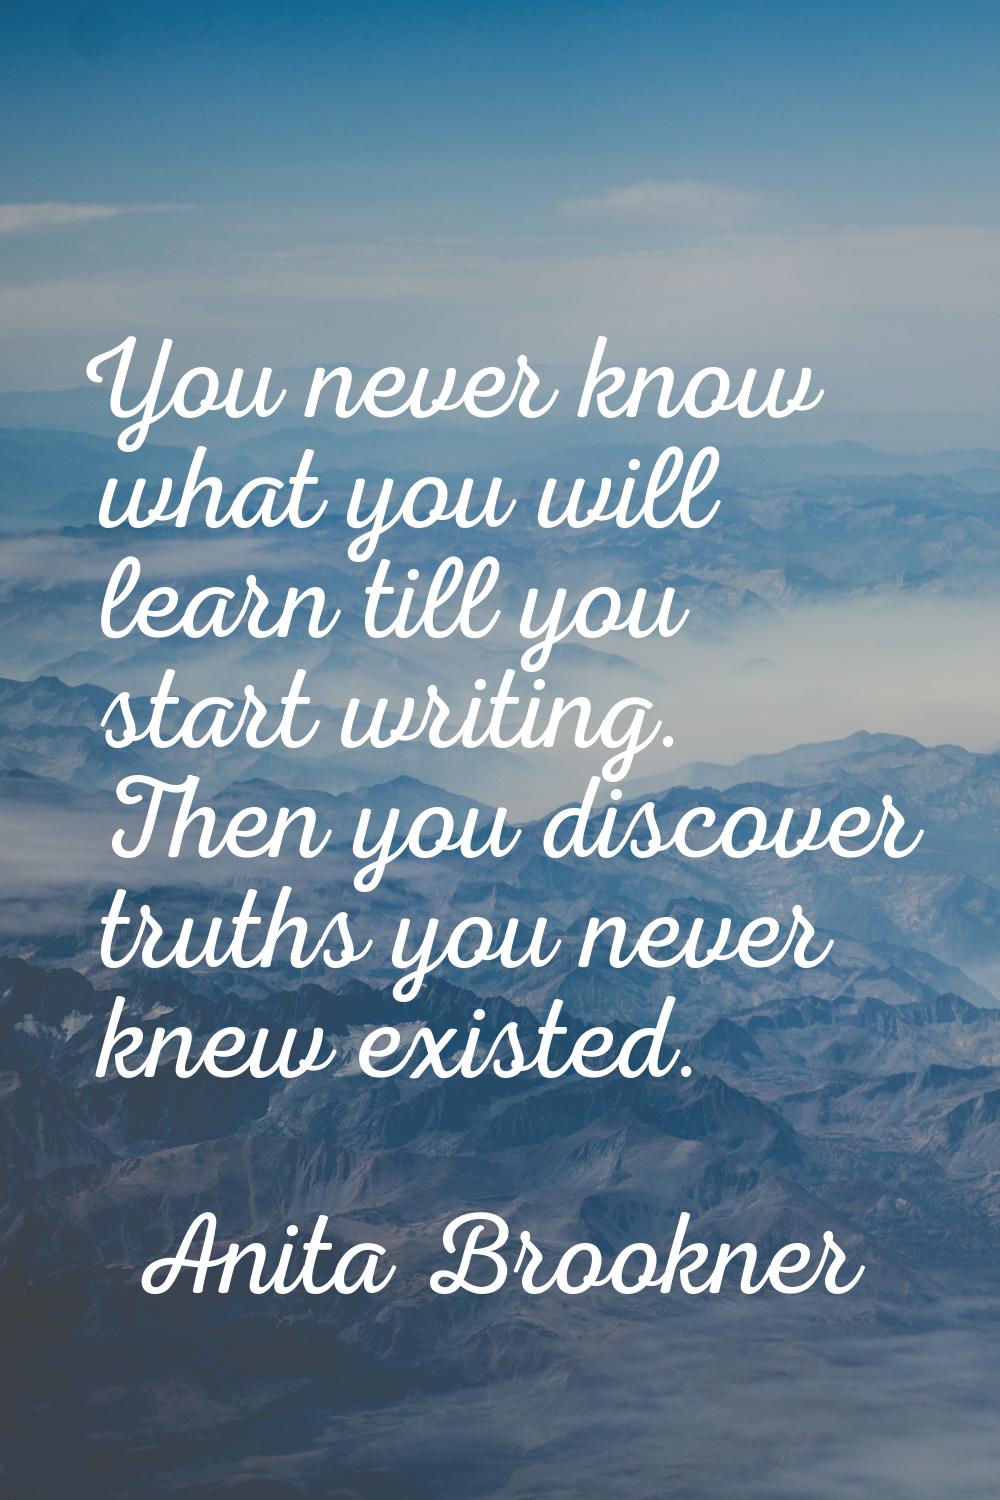 You never know what you will learn till you start writing. Then you discover truths you never knew 